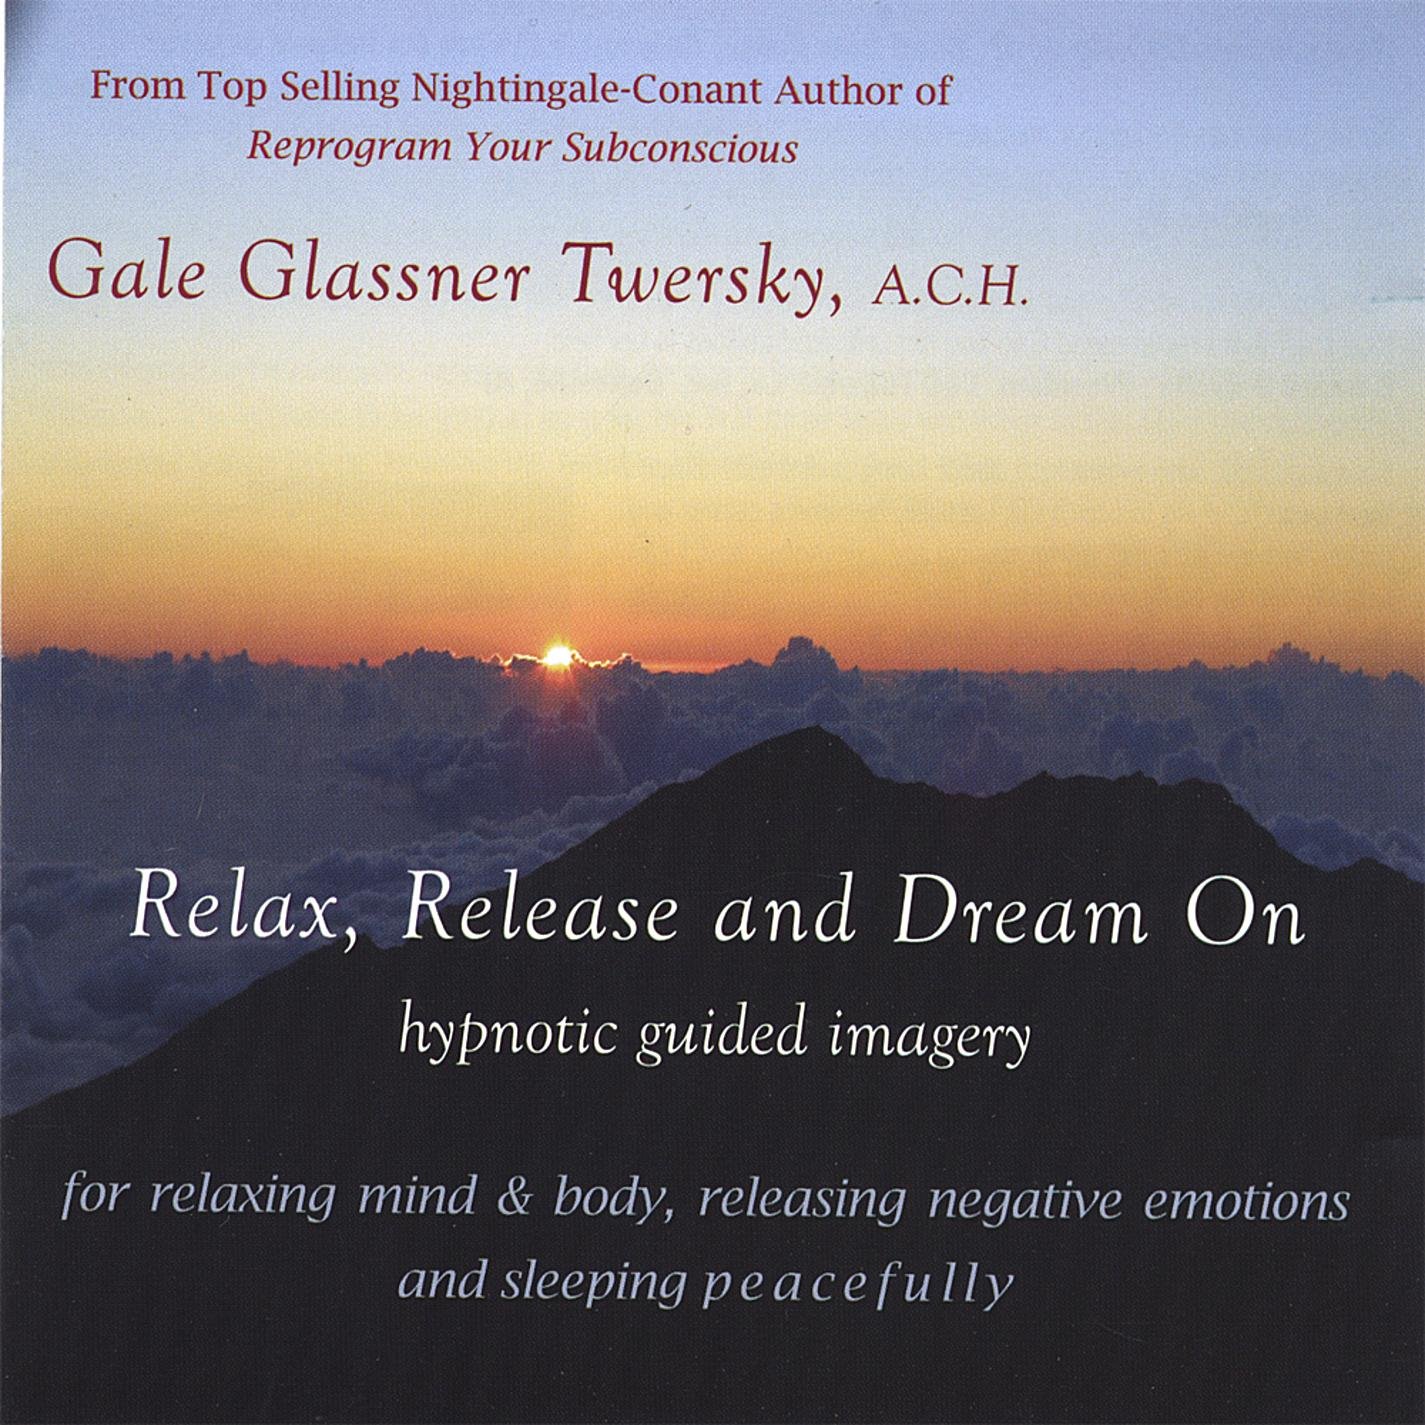 Audio Cd Gale Glassner Twersky - Relax, Release & Dream On, Healing Hypnotic Guided Imagery For Relaxing, Releasing Negative Emotions NUOVO SIGILLATO, EDIZIONE DEL 19/09/2006 SUBITO DISPONIBILE